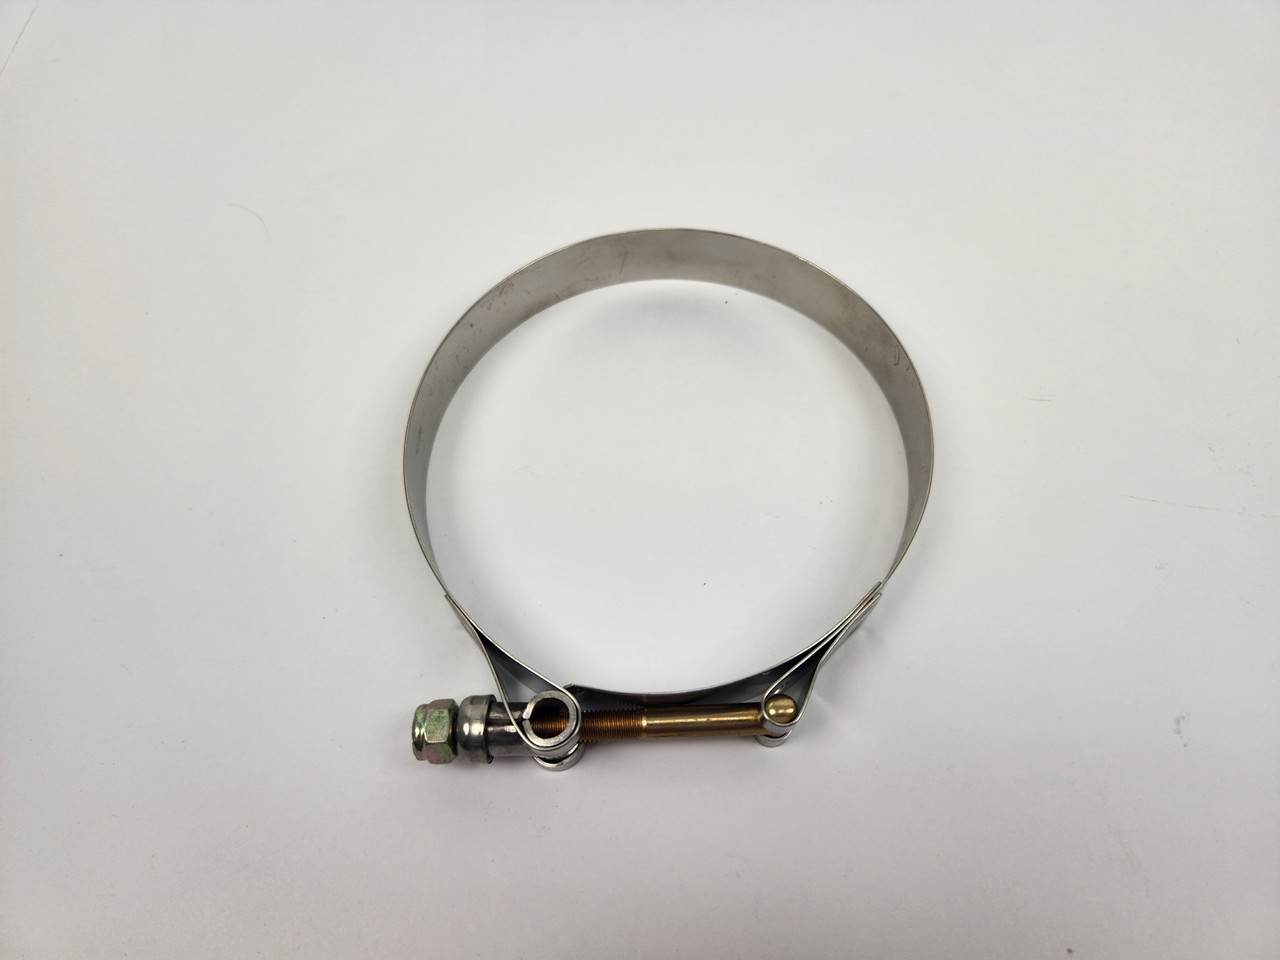 Universal stainless steel clamp